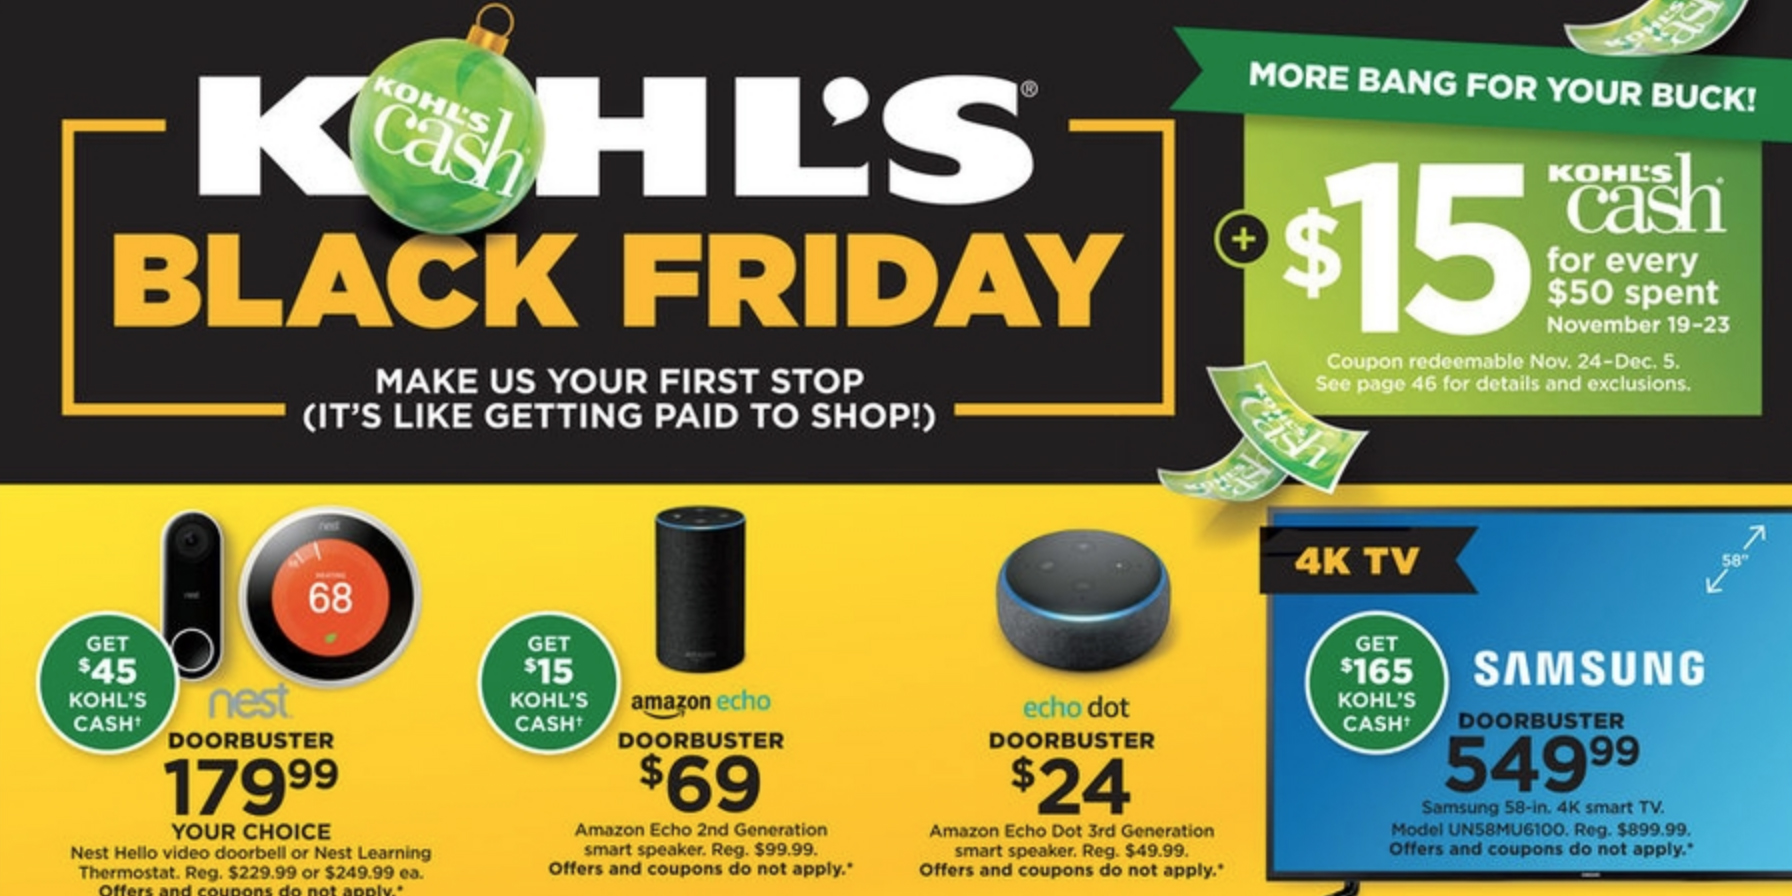 Kohl's Black Friday Ad 2018 - doorbusters, Kohl's cash, more - 9to5Toys